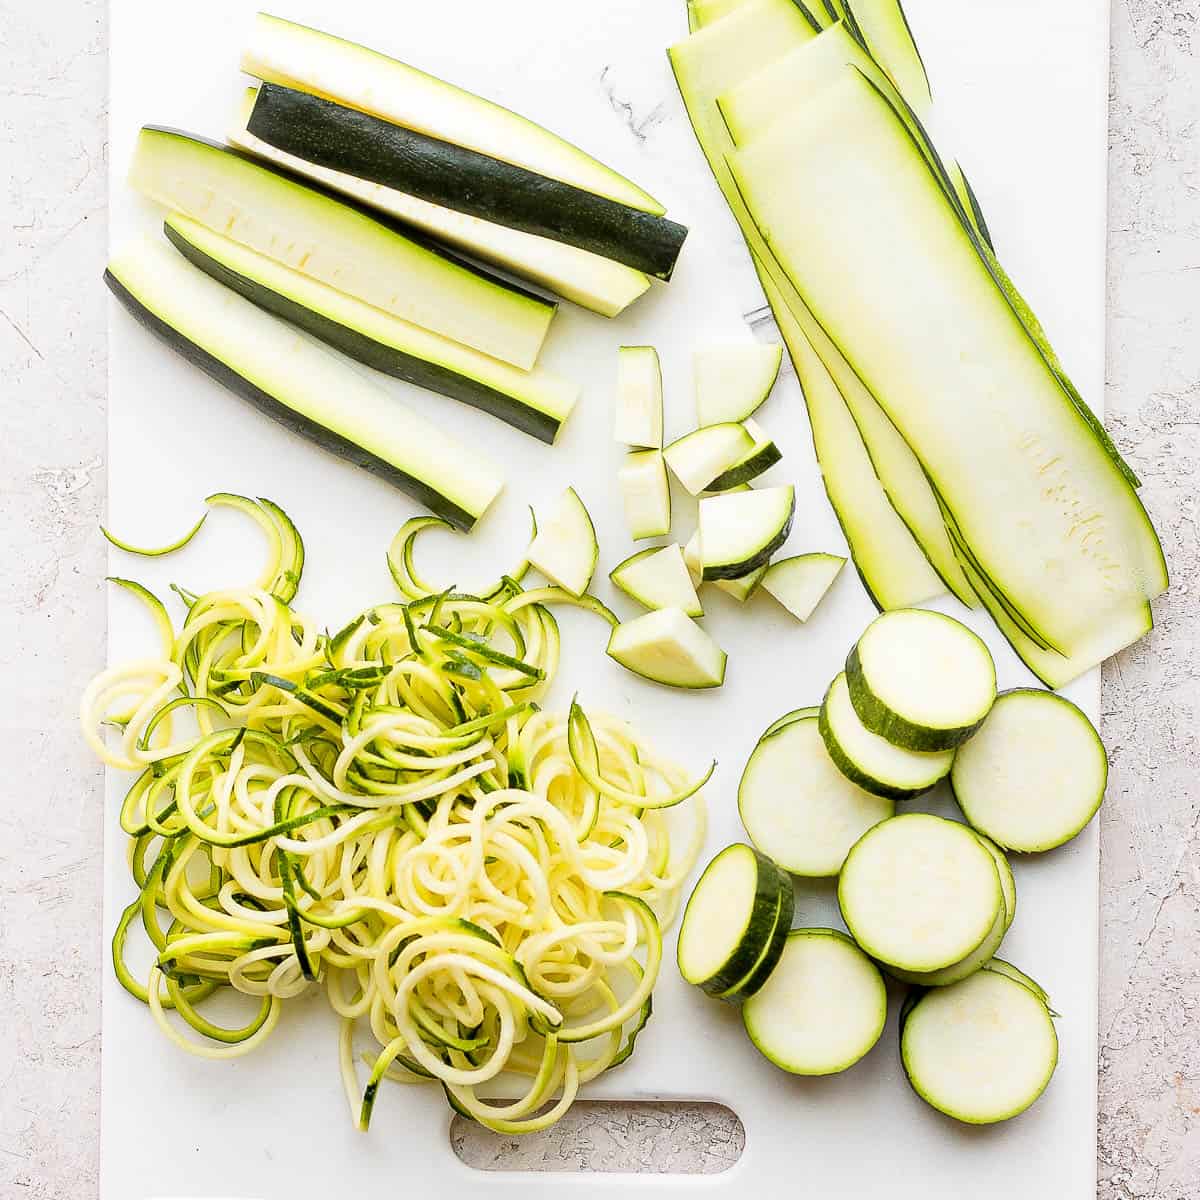 https://thewoodenskillet.com/wp-content/uploads/2022/09/how-to-cut-zucchini-tutorial-1.jpg